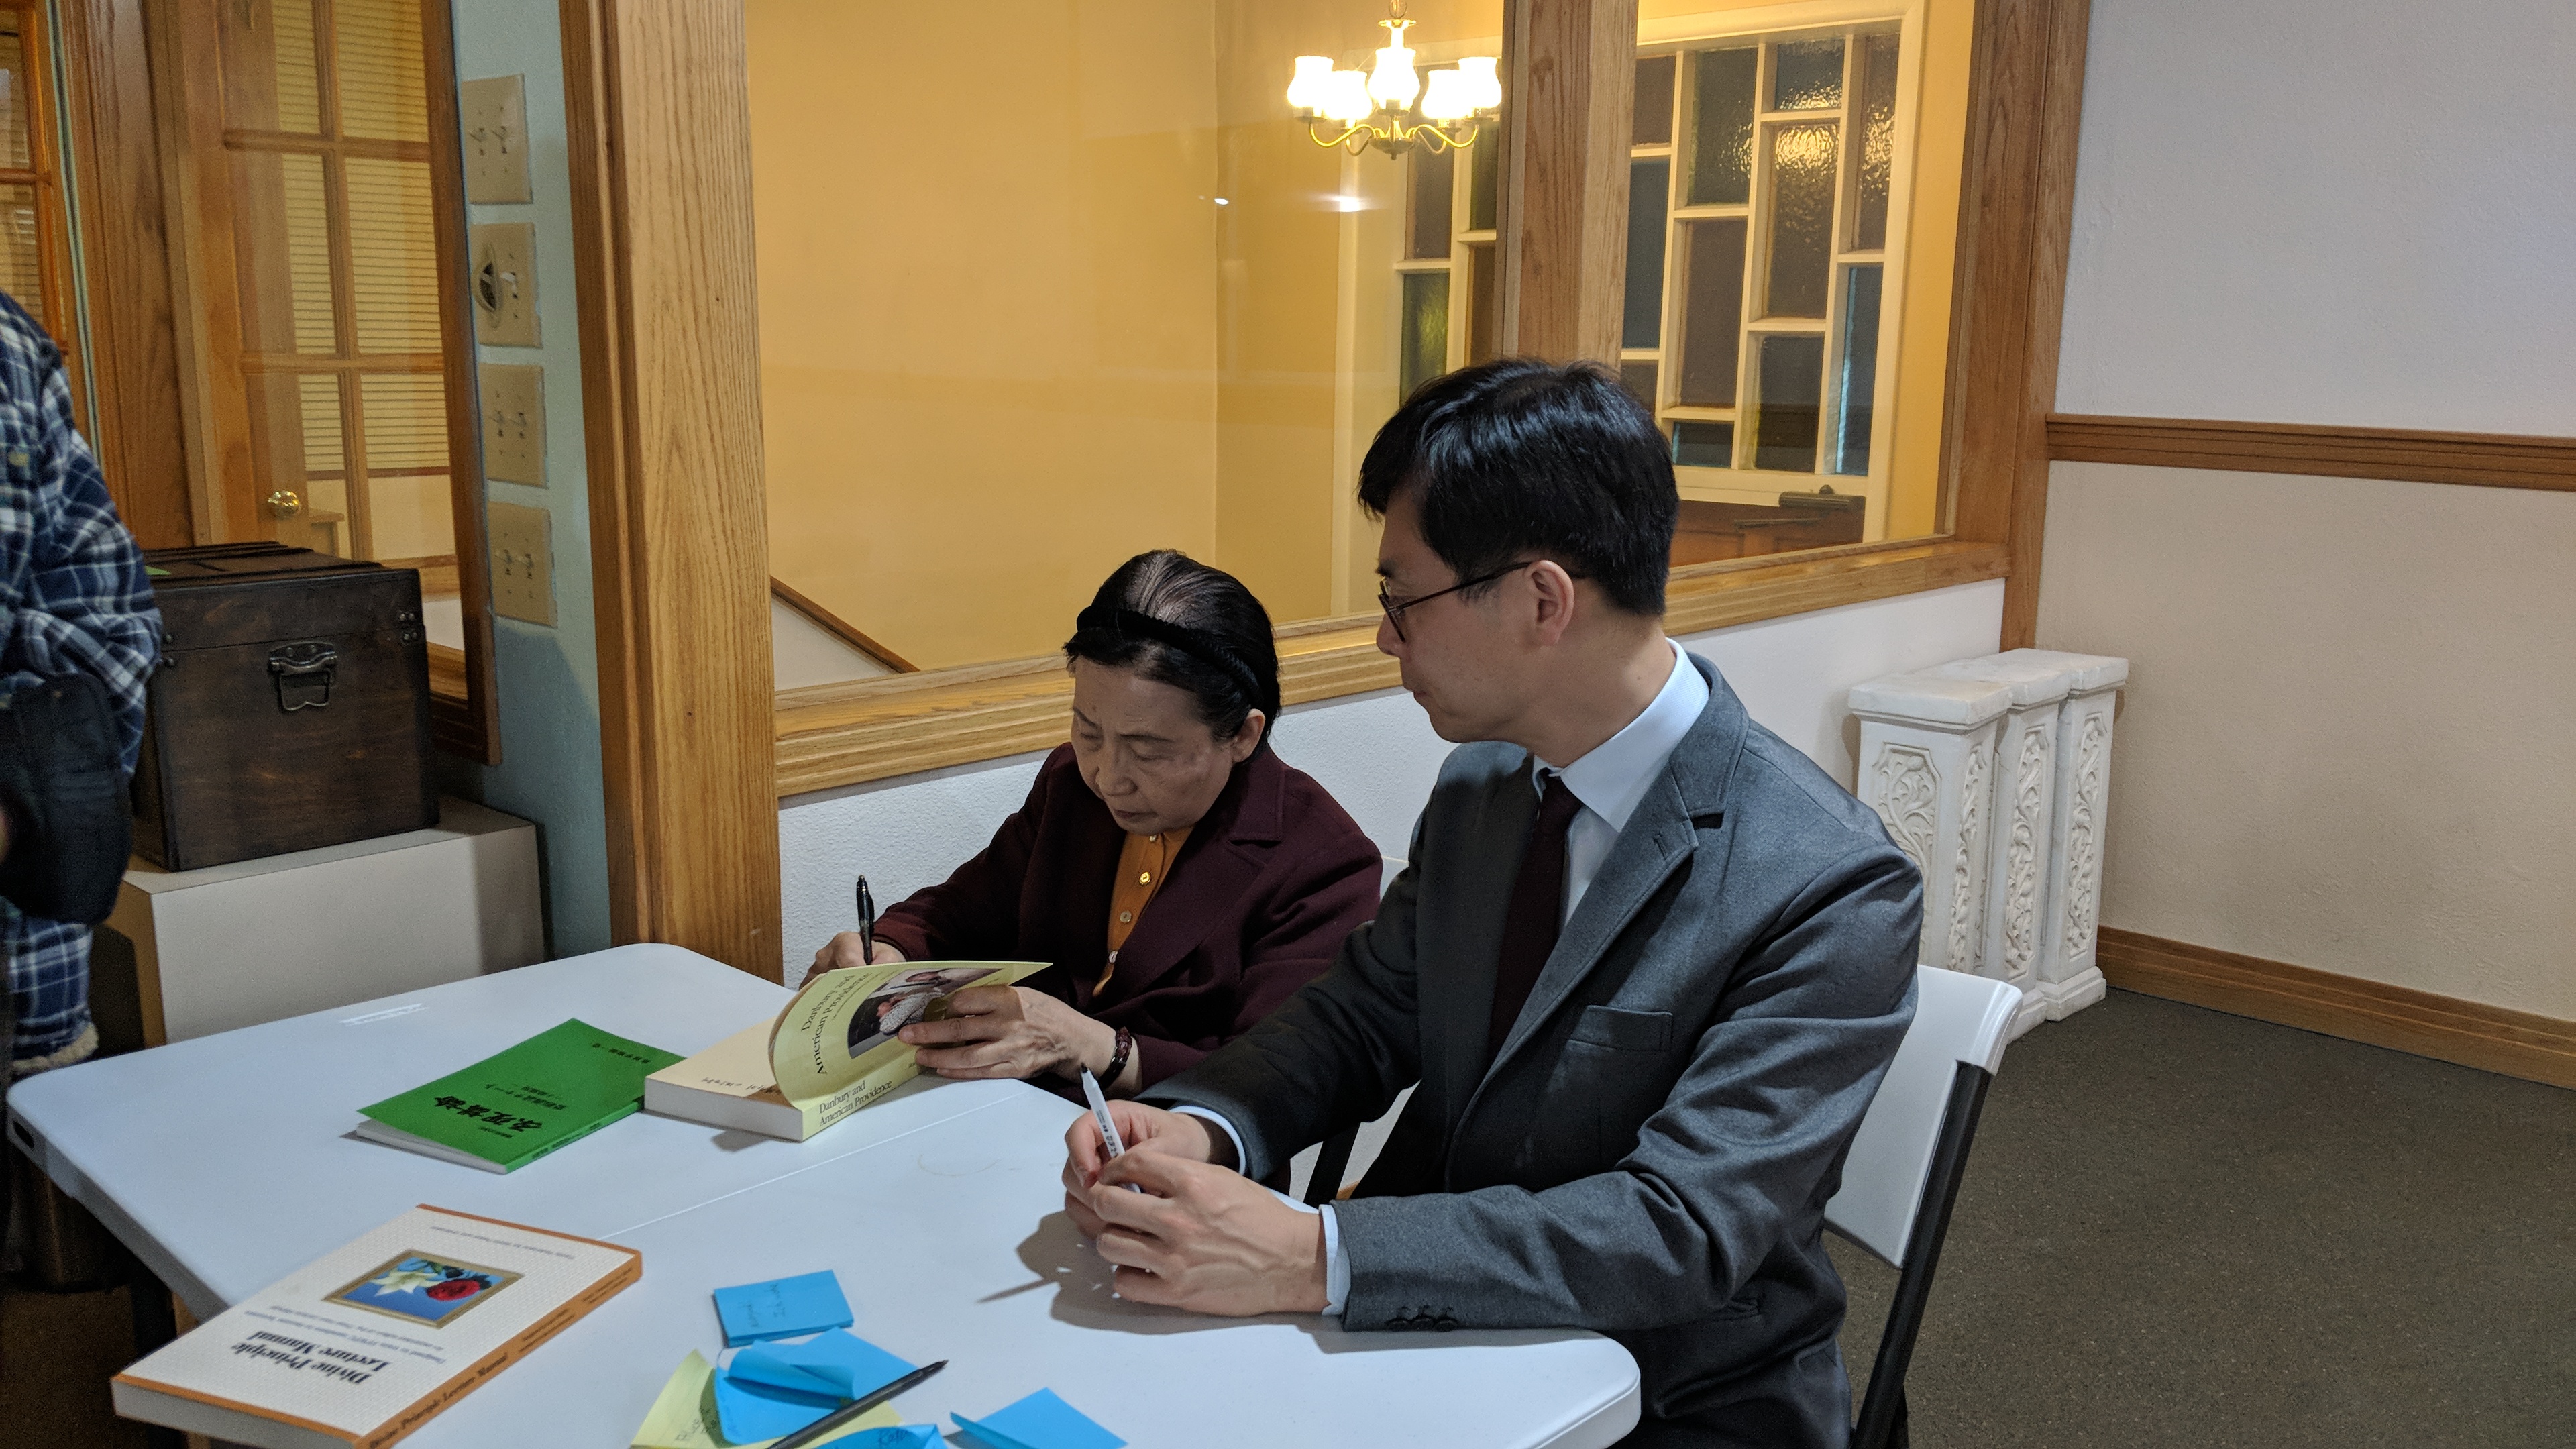 Mrs. Eu signing books with her son Jinseung